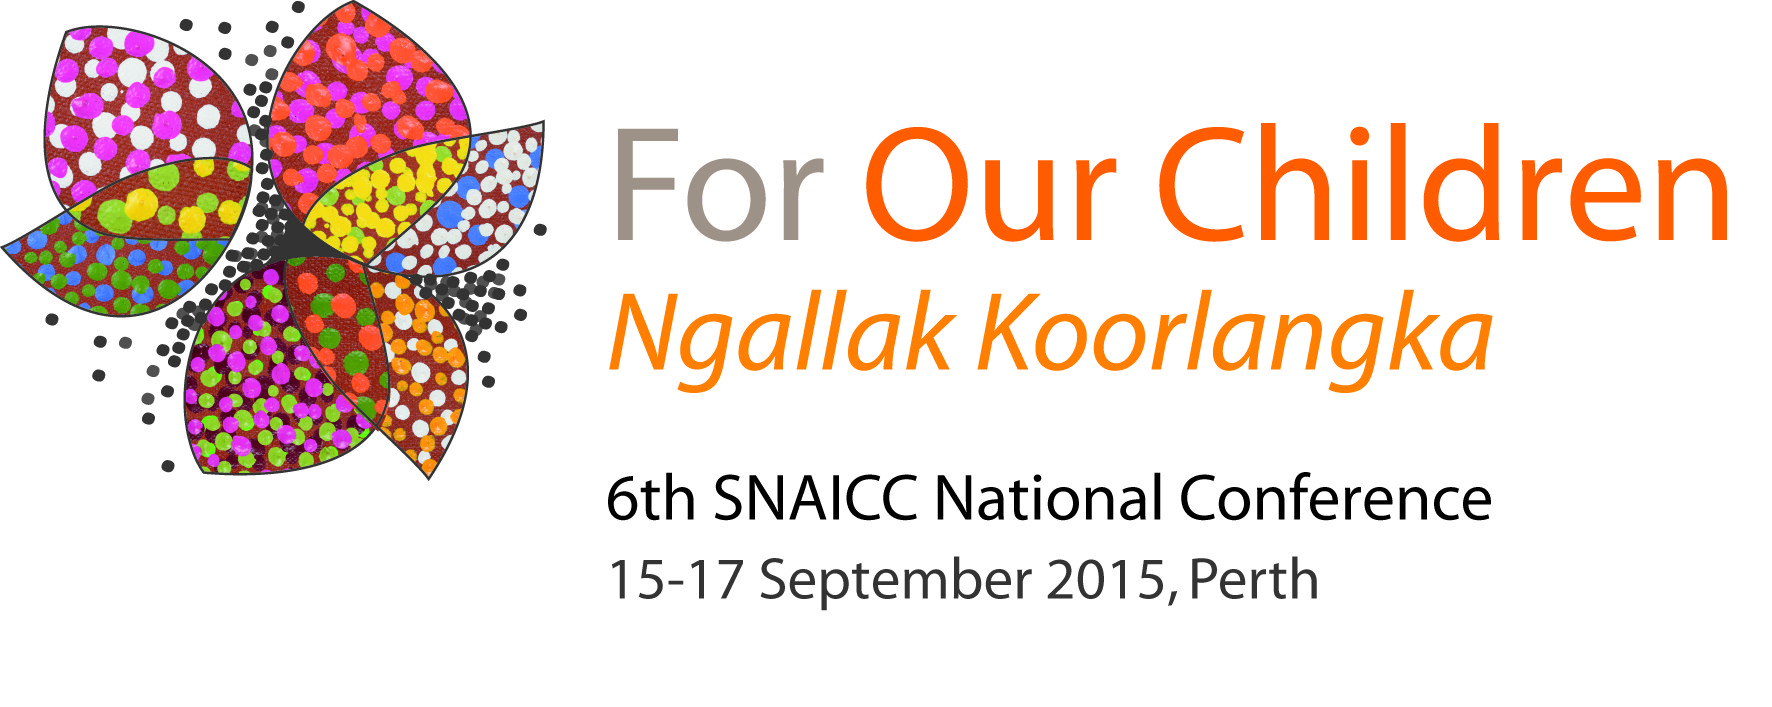 6th SNAICC National Conference